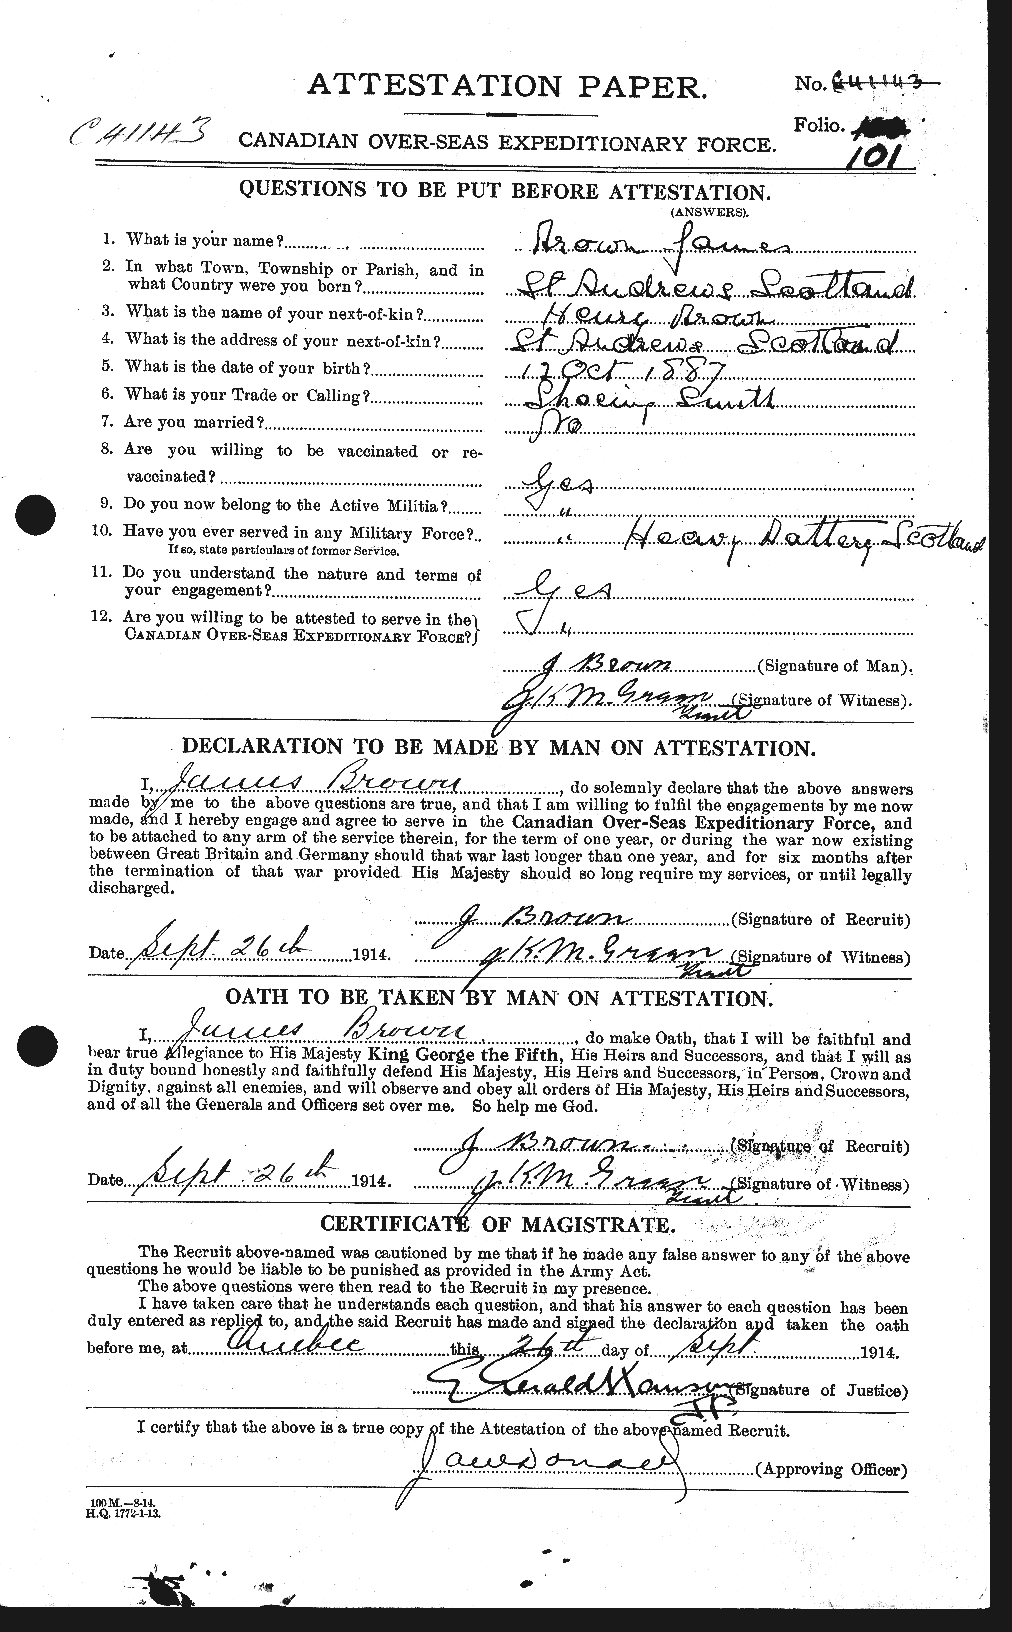 Personnel Records of the First World War - CEF 265727a